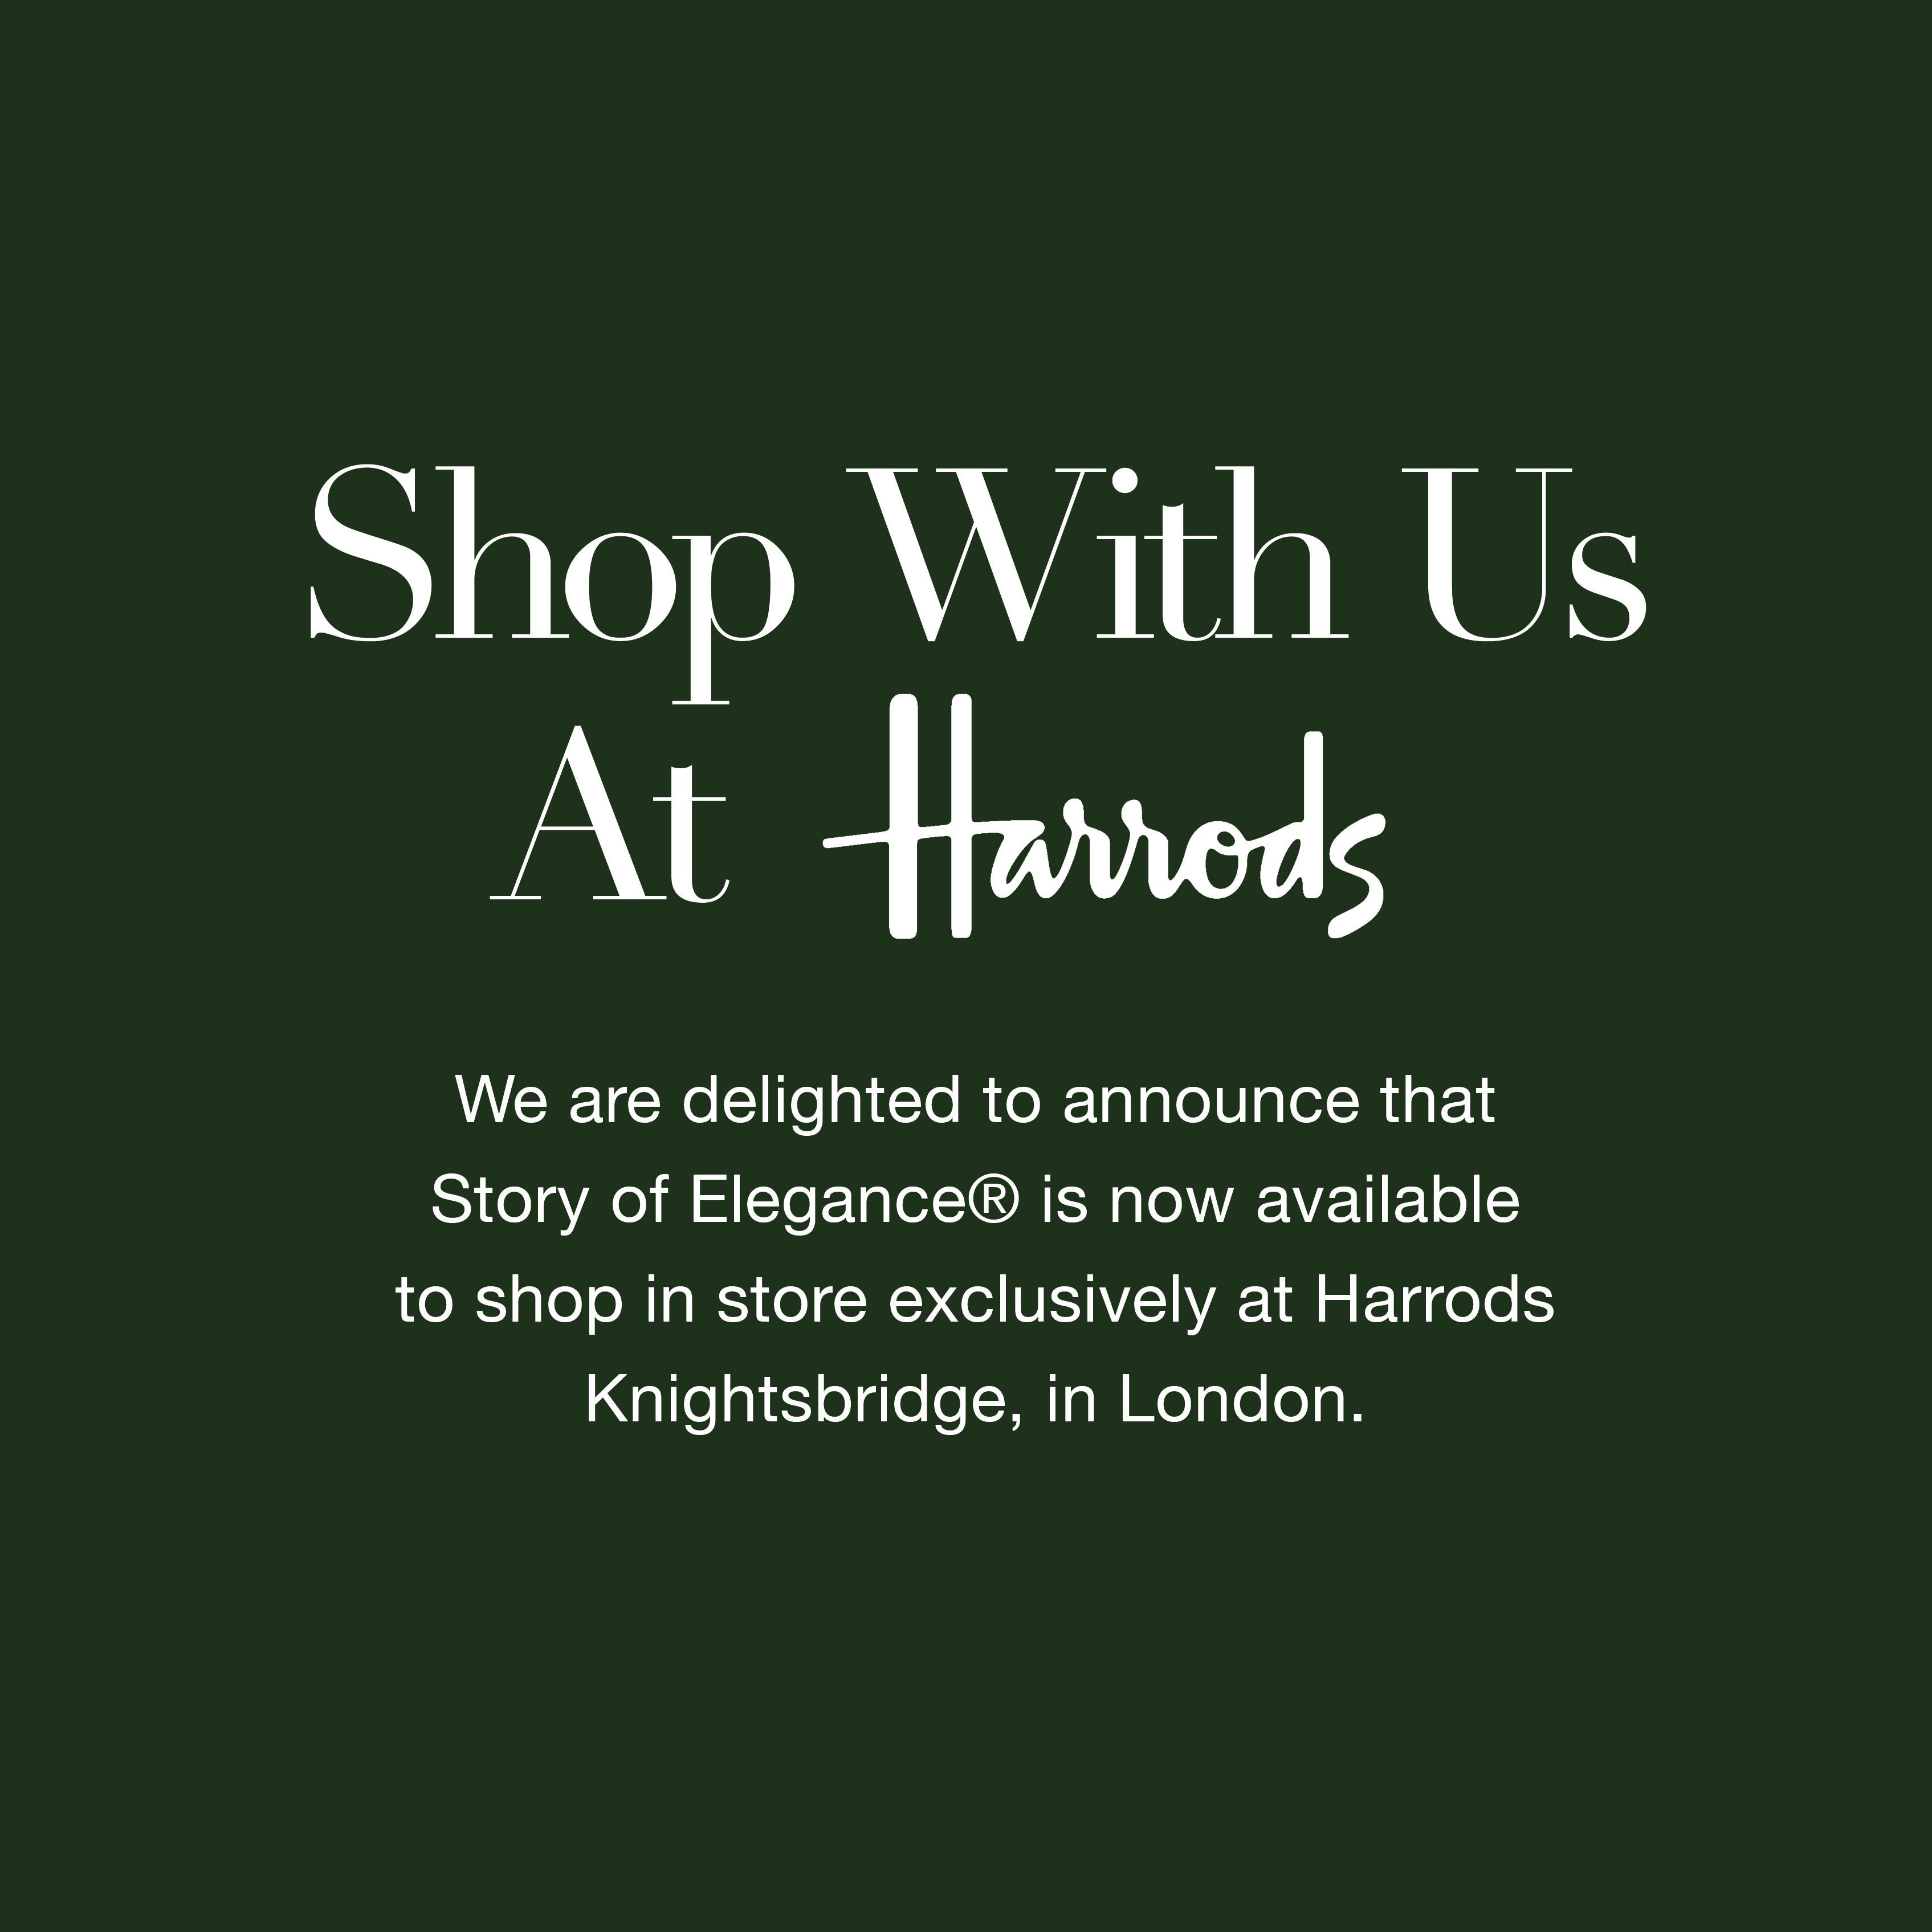 Story of Elegance In Store, At Harrods